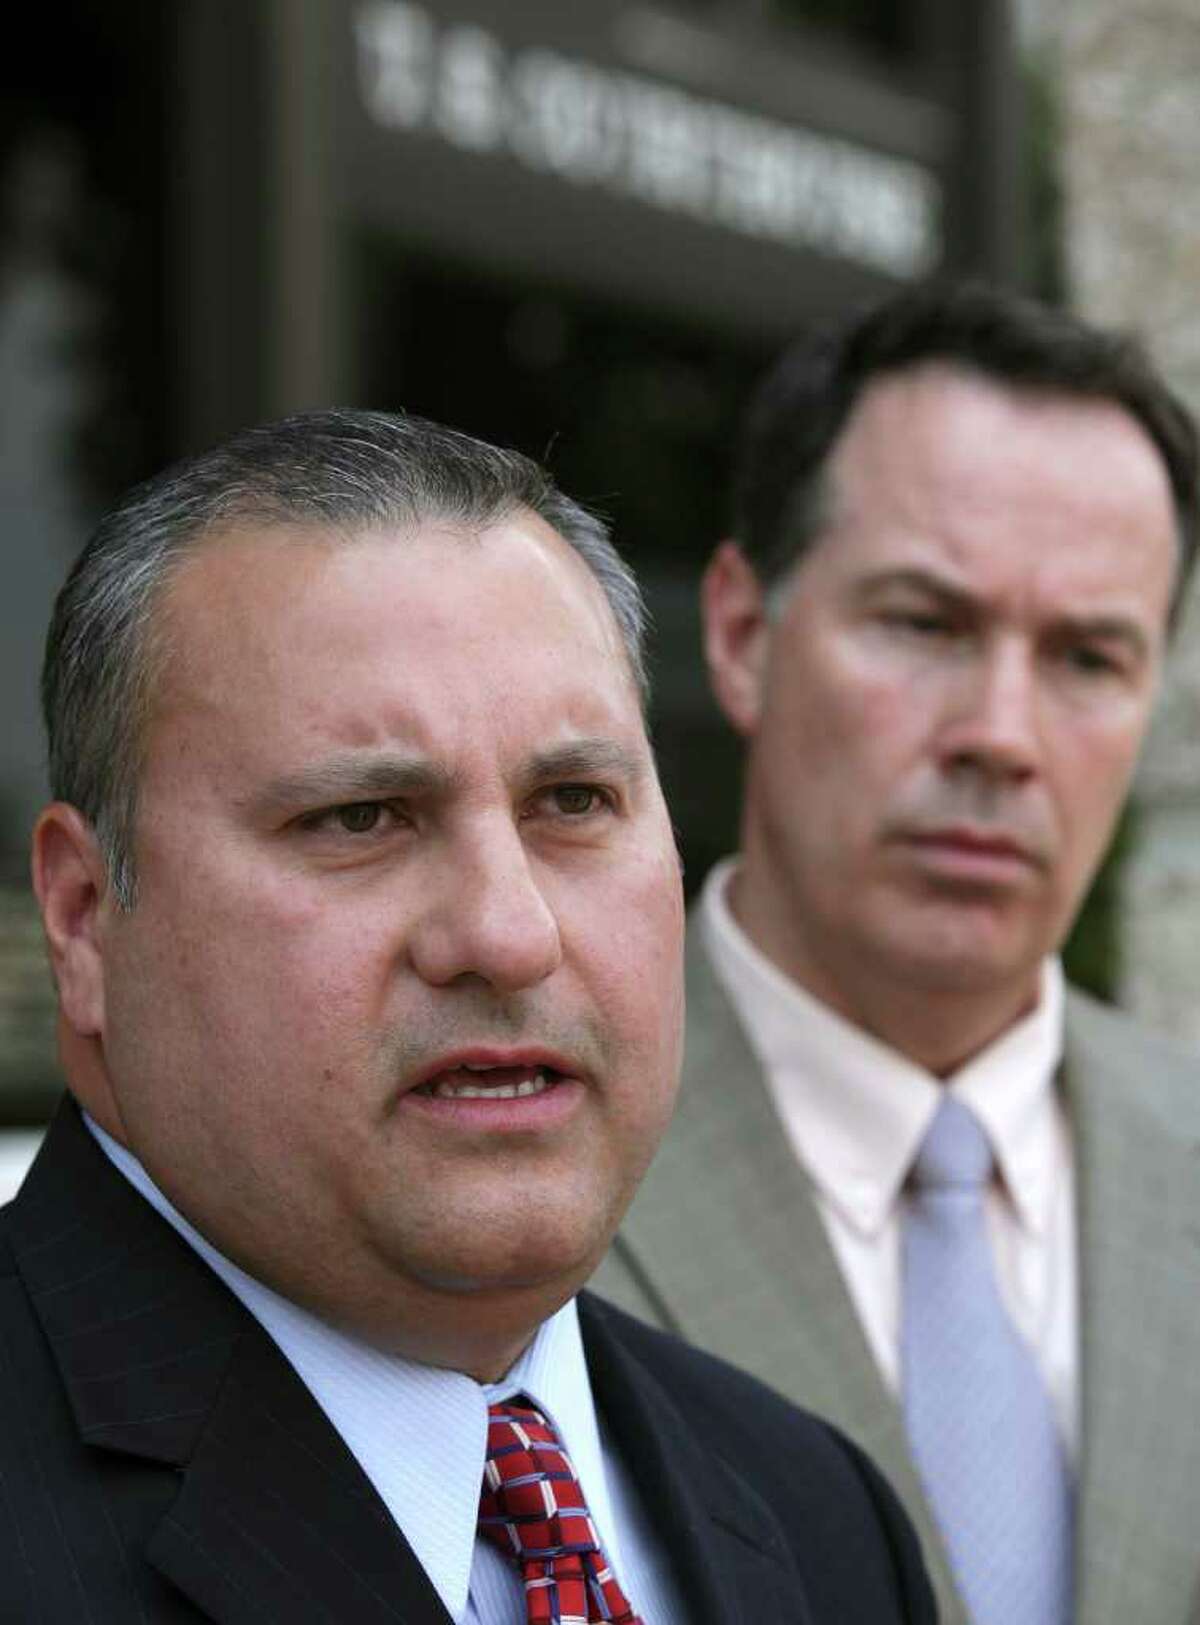 Chris Martinez, Assistant Superintendent Human Resources and Public Relations for Medina Valley ISD, speaks to the media following a hearing concerning the use of prayer in the Medina Valley High School's graduation ceremonies this Saturday. At right is the district's attorney, D. Craig Wood. Tuesday, May 31, 2011. Photo Bob Owen/rowen@express-news.net